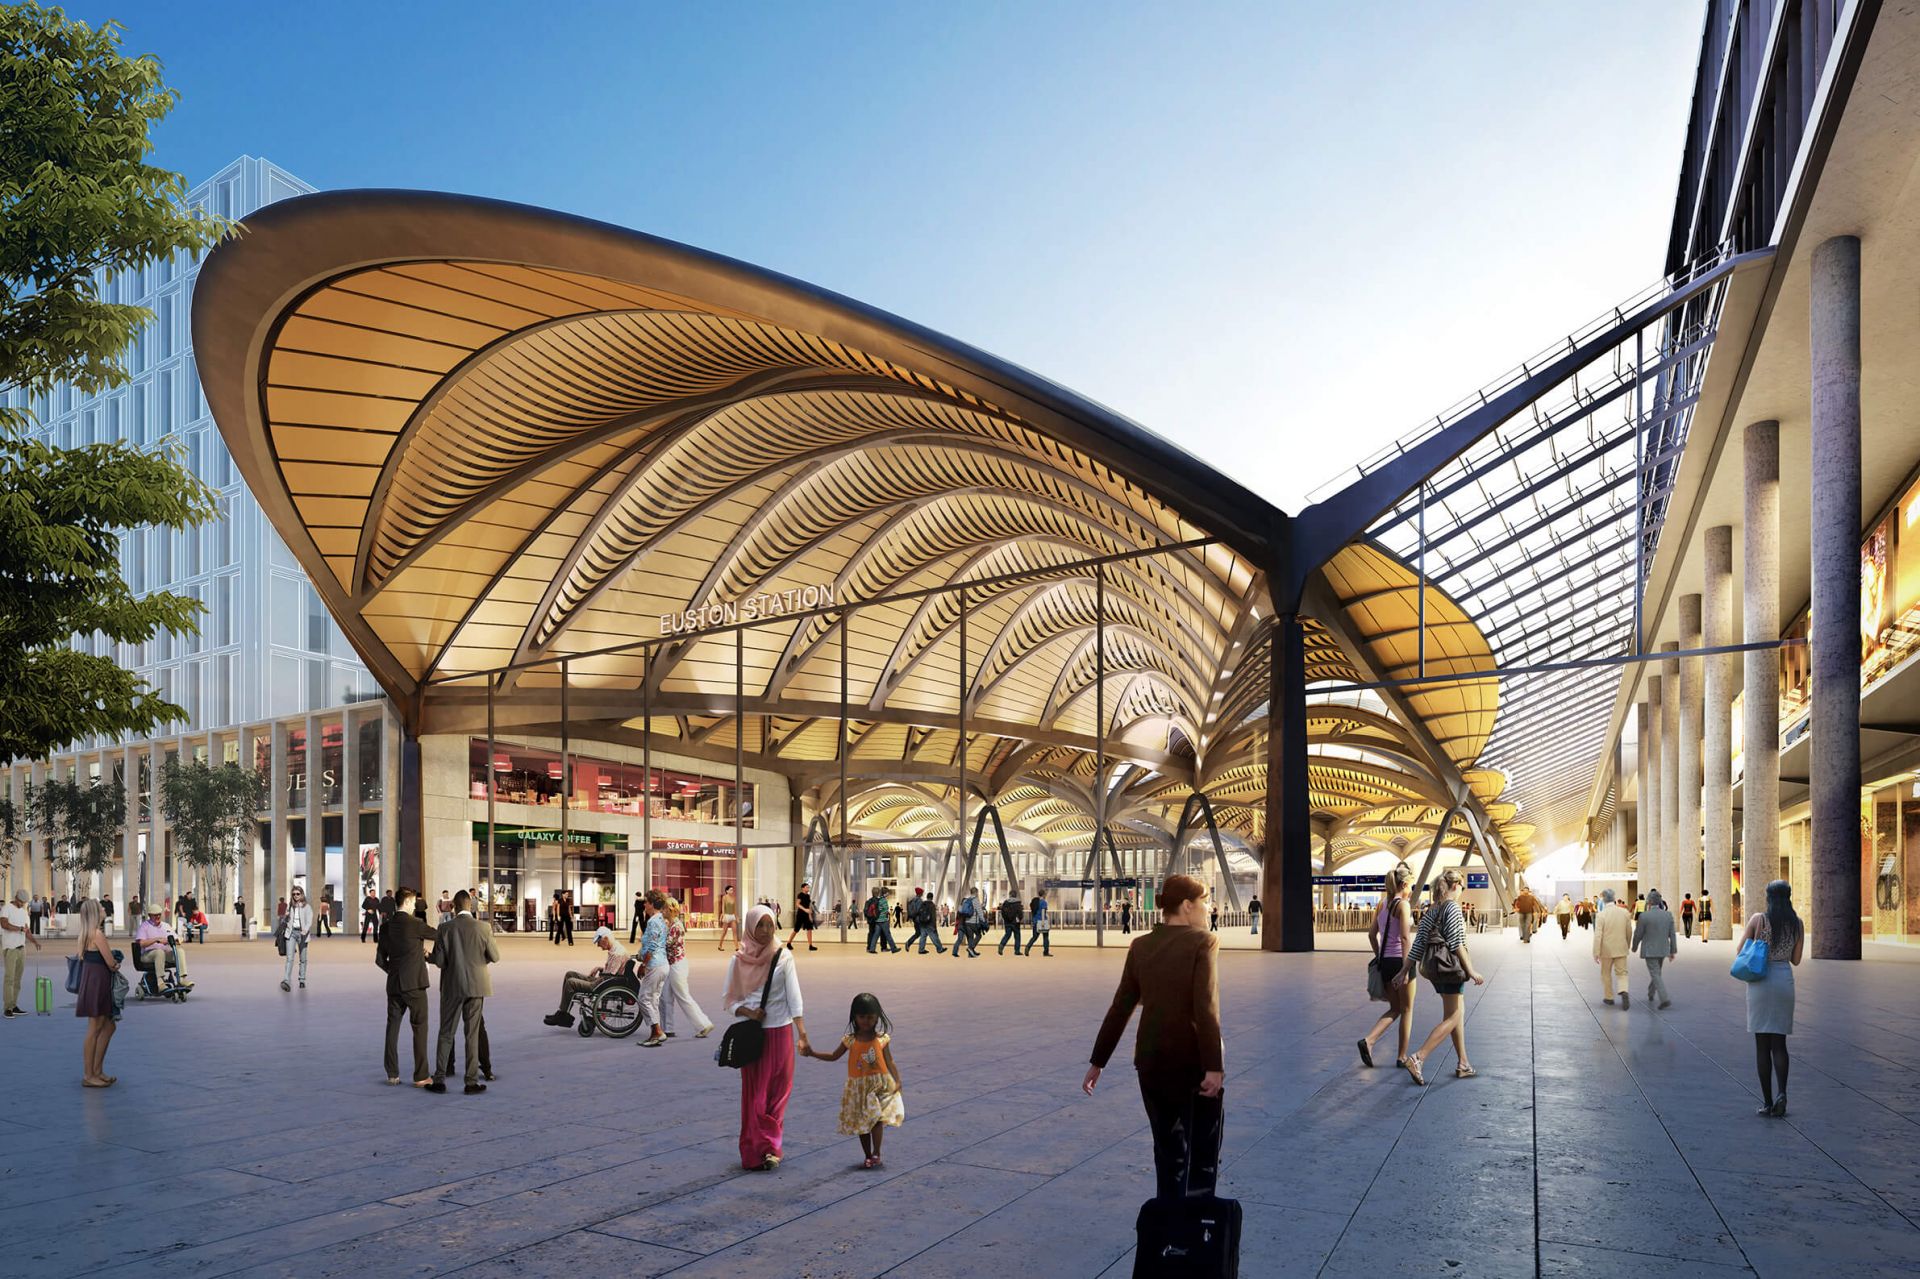 The technology used to deliver an exceptionally reliable and accessible high-speed network for accommodating the High Speed Two (HS2) railway line at London Euston station, UK, was the open gigabit industrial Ethernet solution, CC-Link IE.